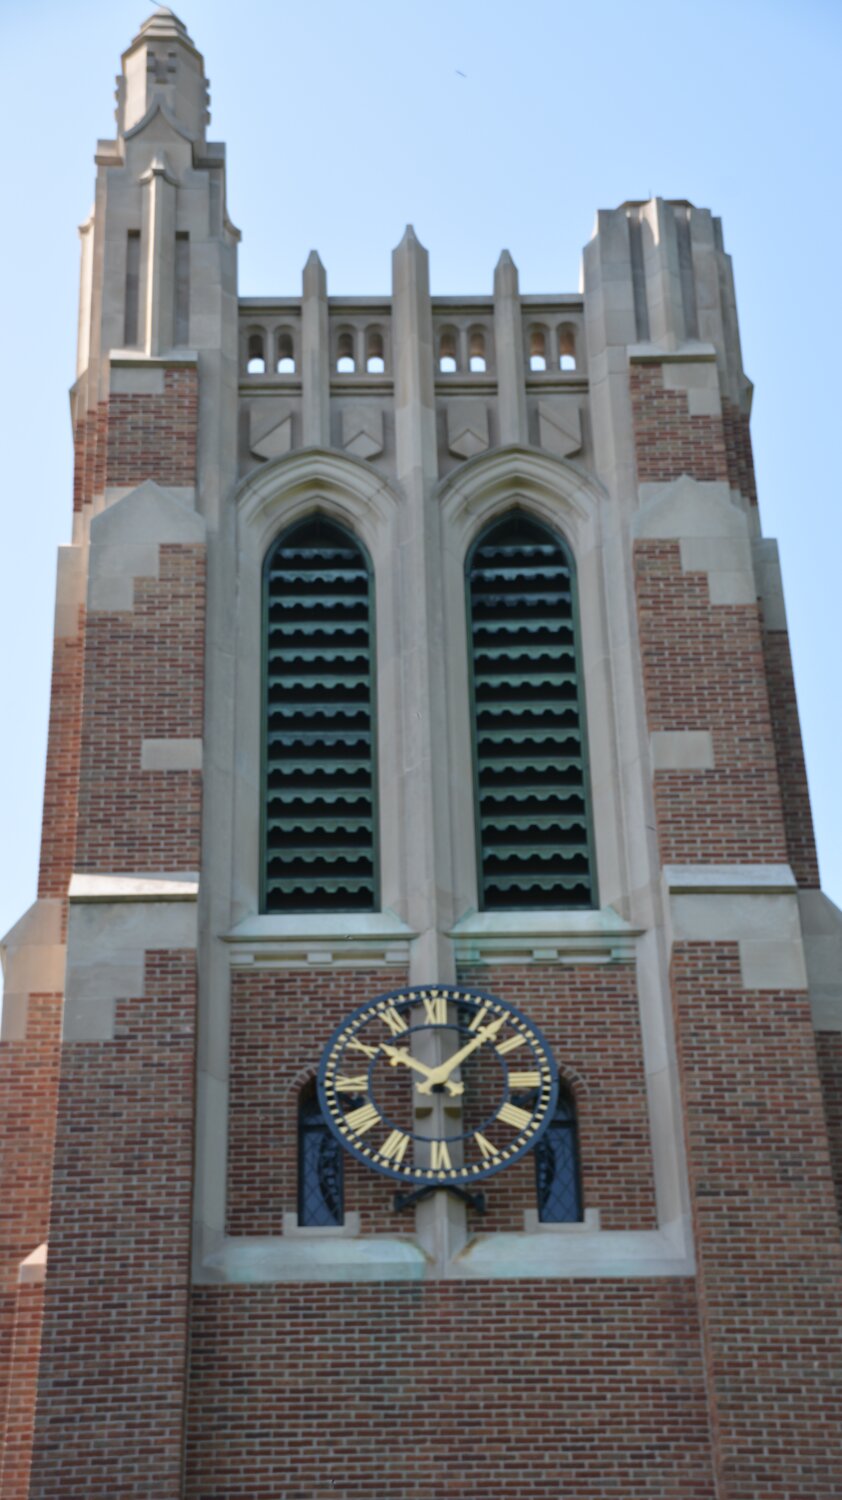 The tour will meet at Beaumont Tower and will be led by MSU Archives staff.